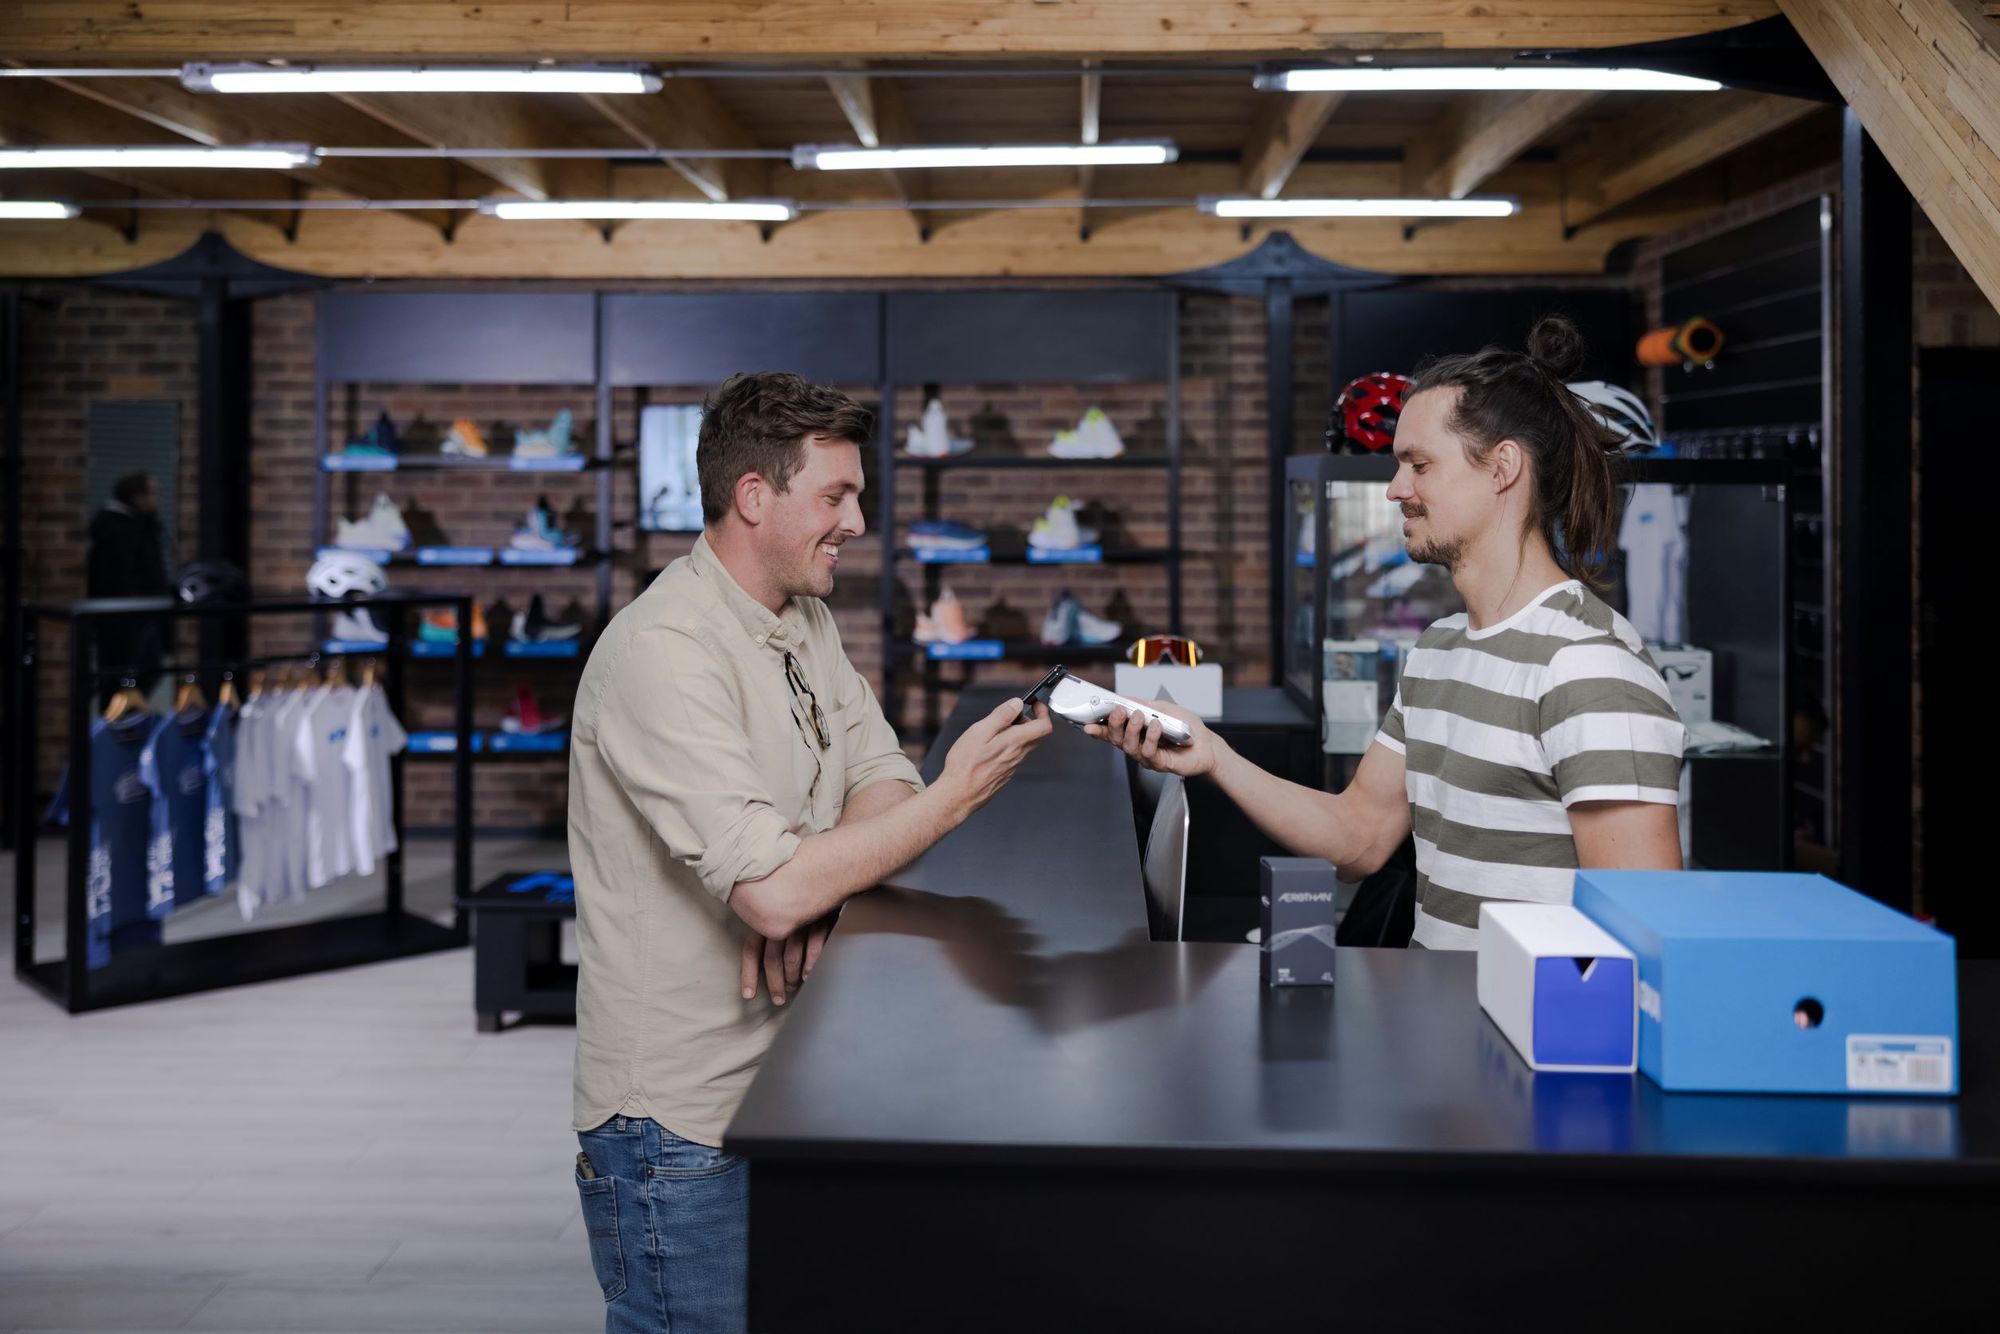 A customer taps to pay on a handheld POS at a sporting goods store.